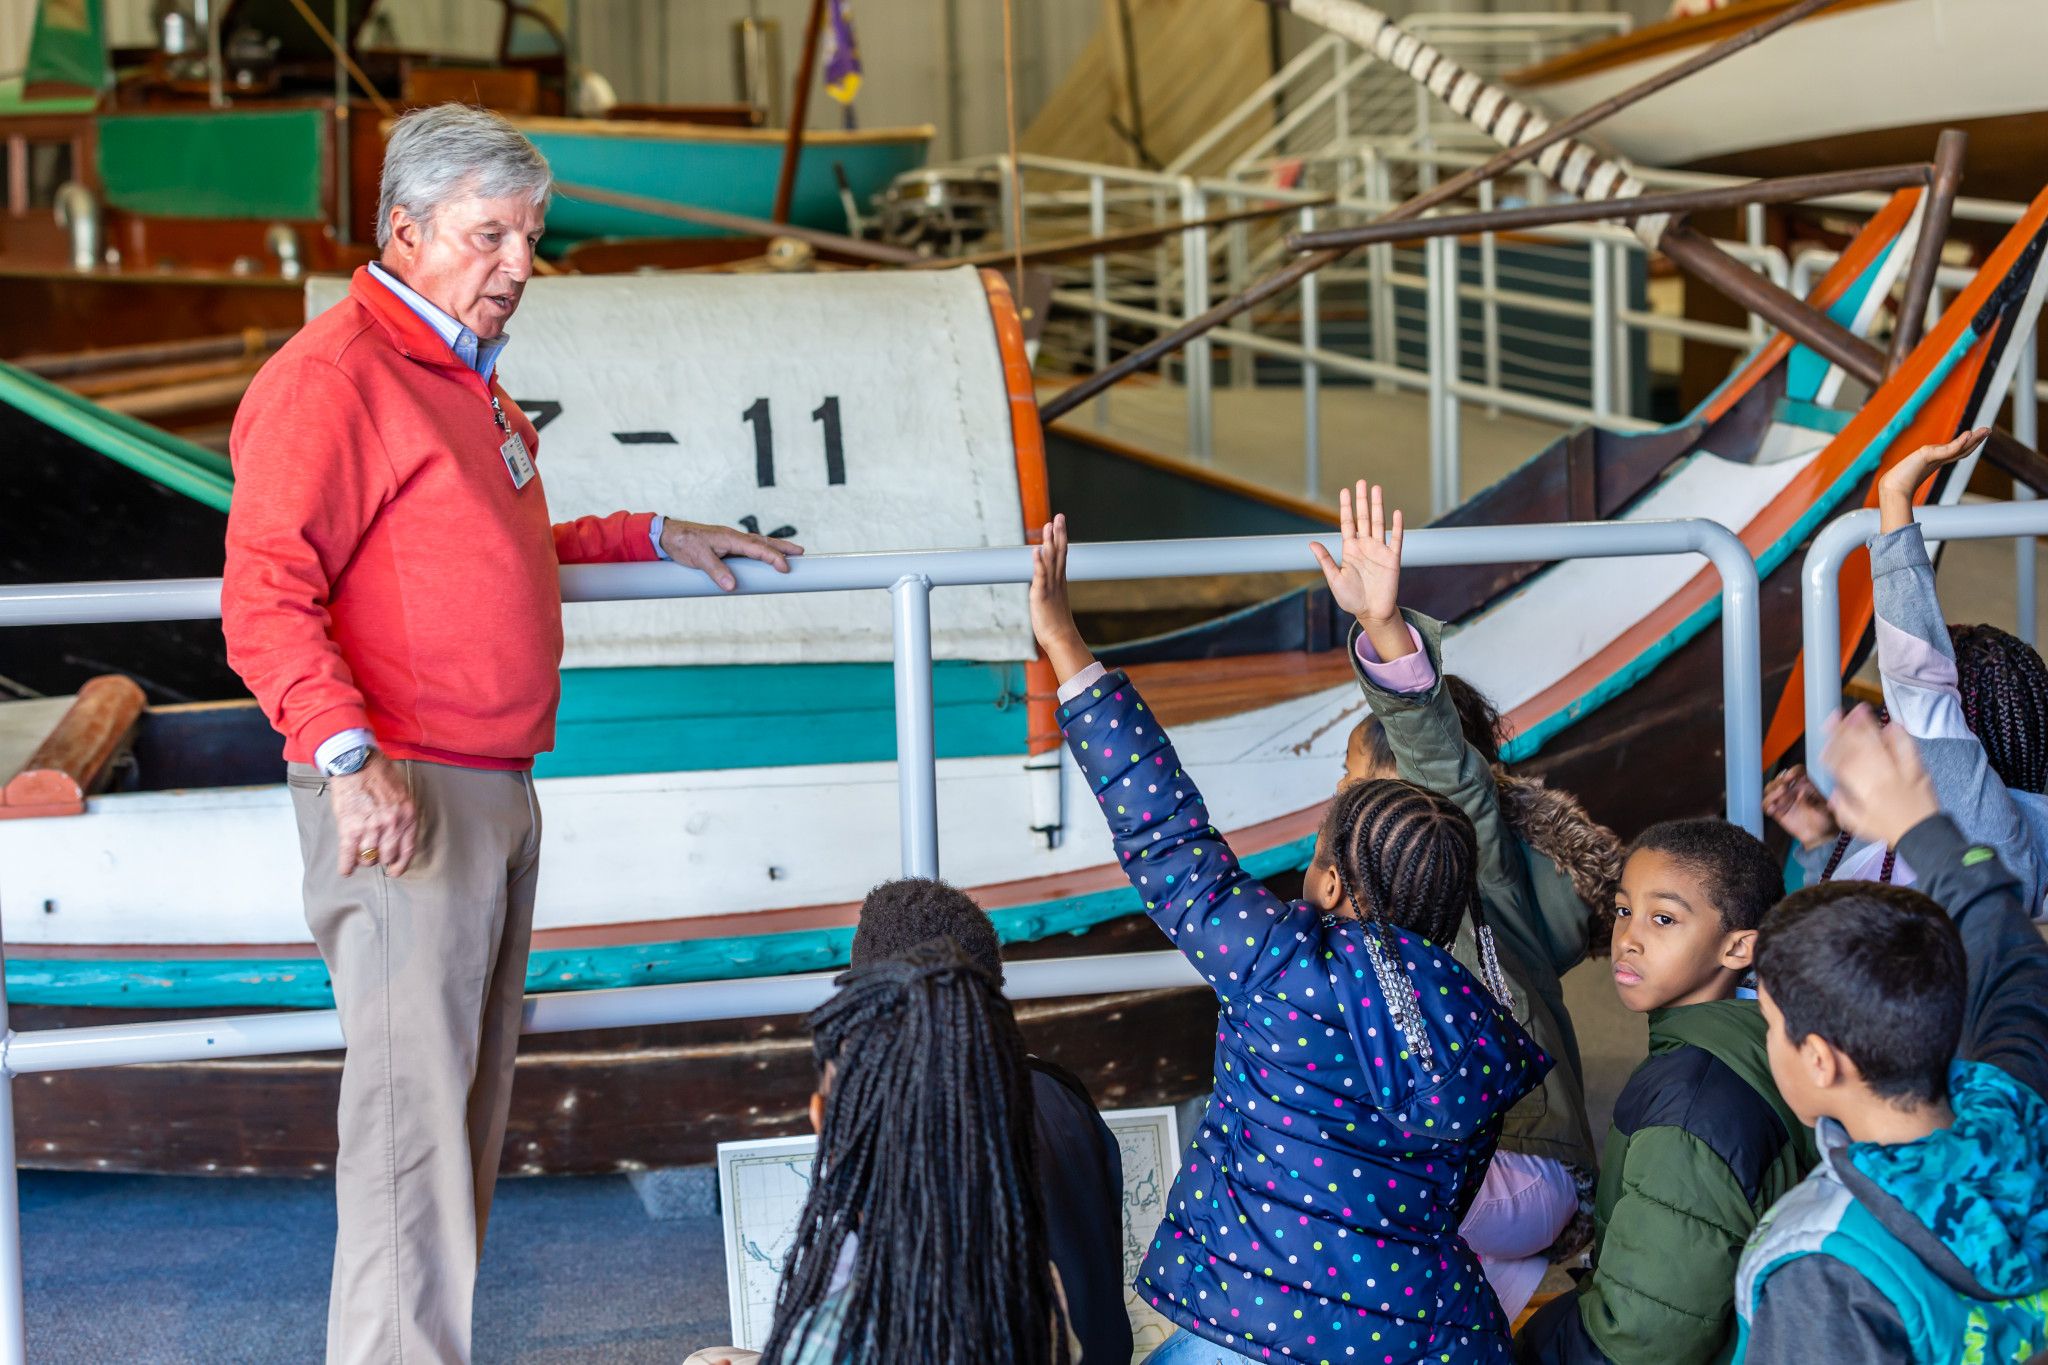 Docent seen teaching children in the International Small Craft Center. Multiple students are seen raising their hands and engaging with the program.